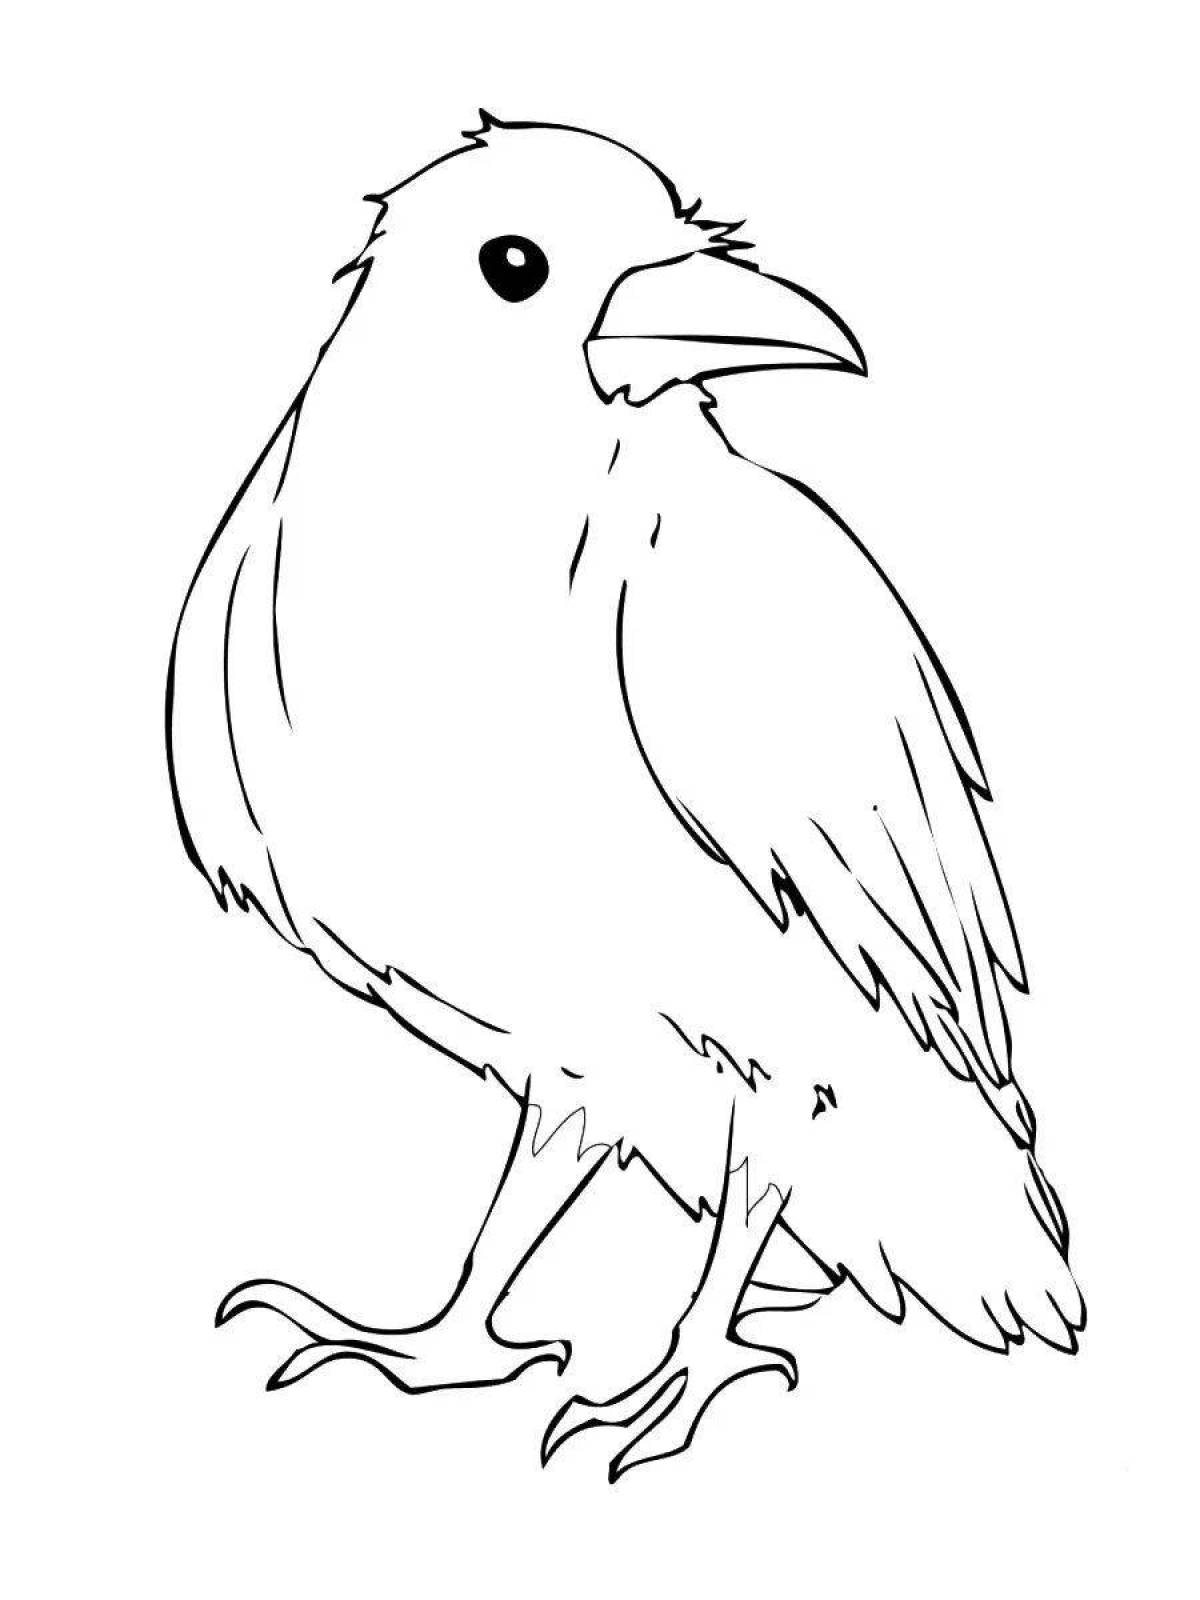 Cute jackdaw coloring book for kids